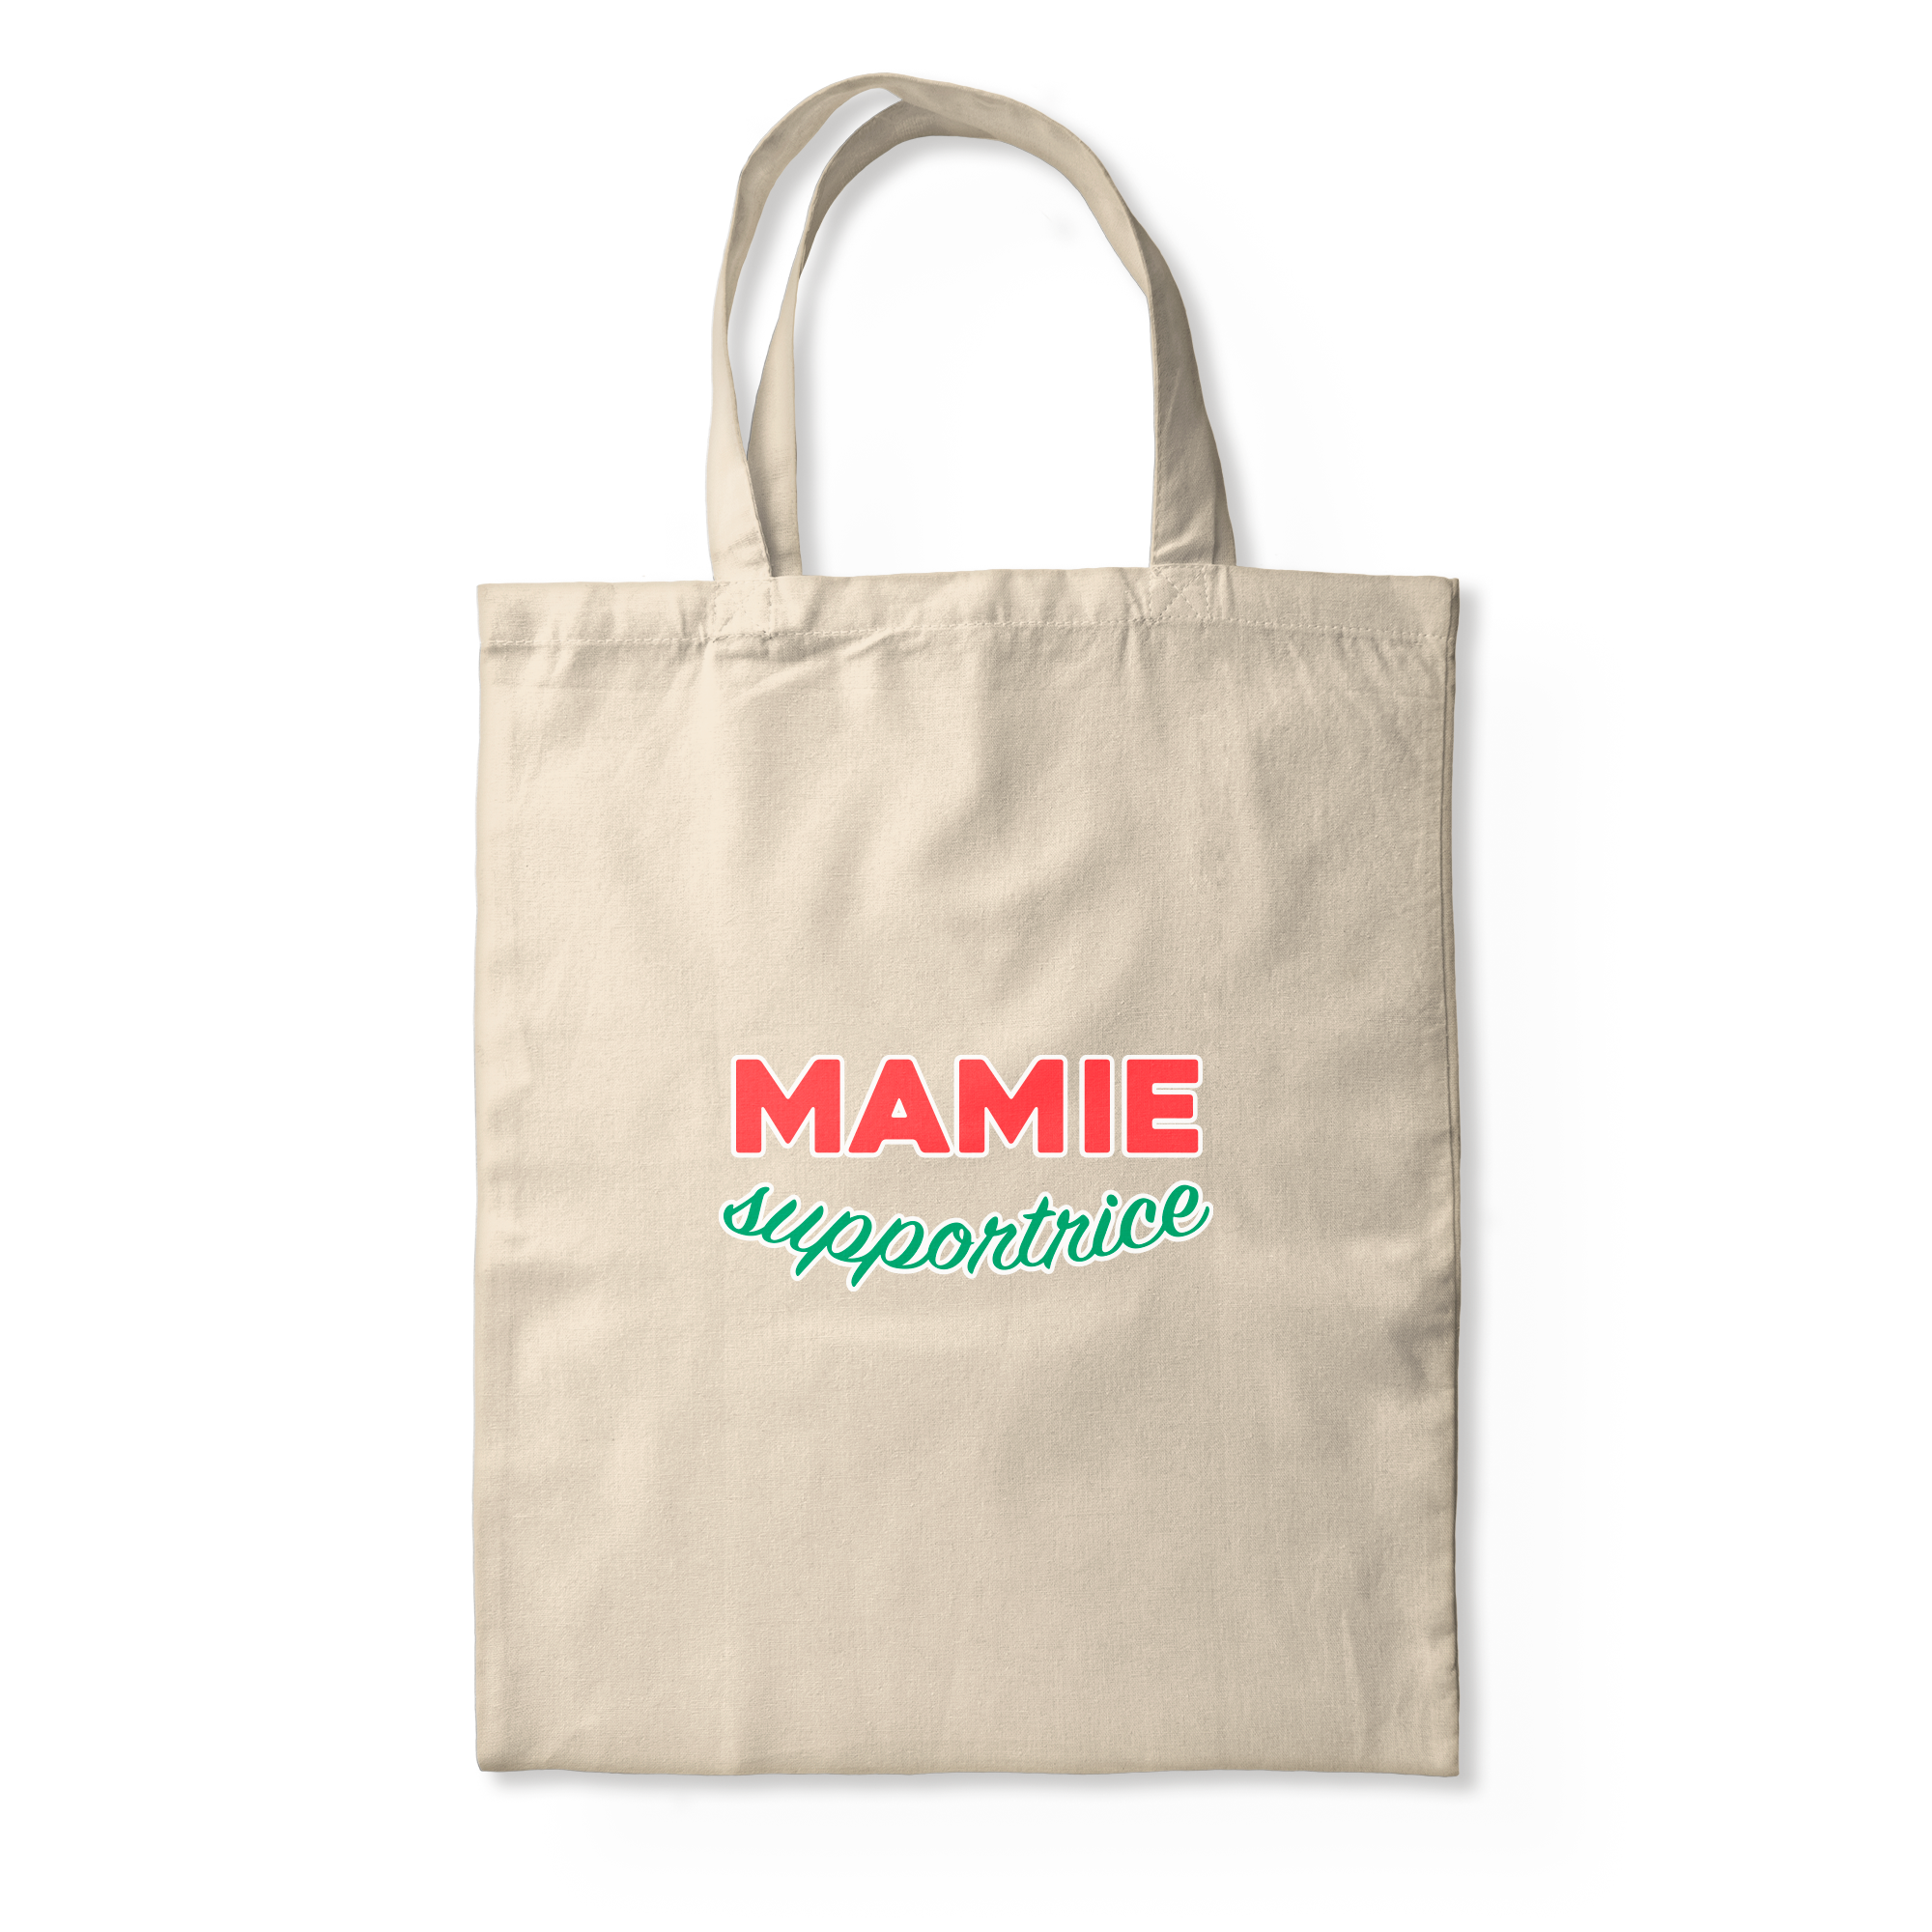 MAMIE supportrice - TOTE BAG